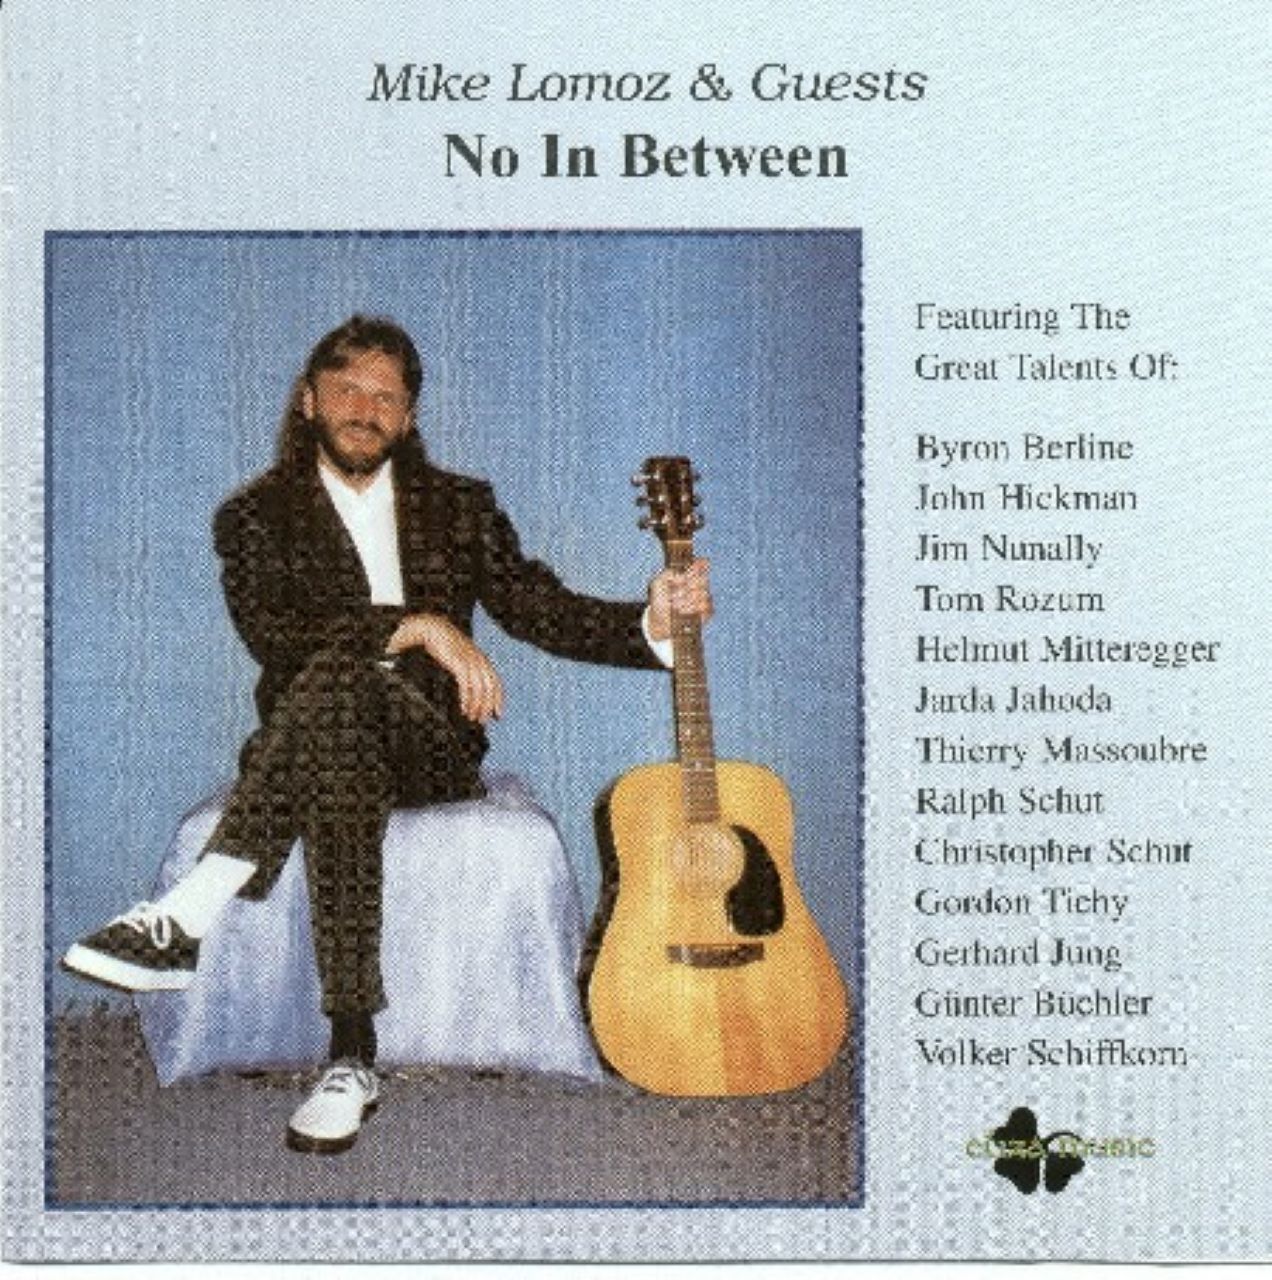 Mike Lomoz & Guests – No In Between cover album